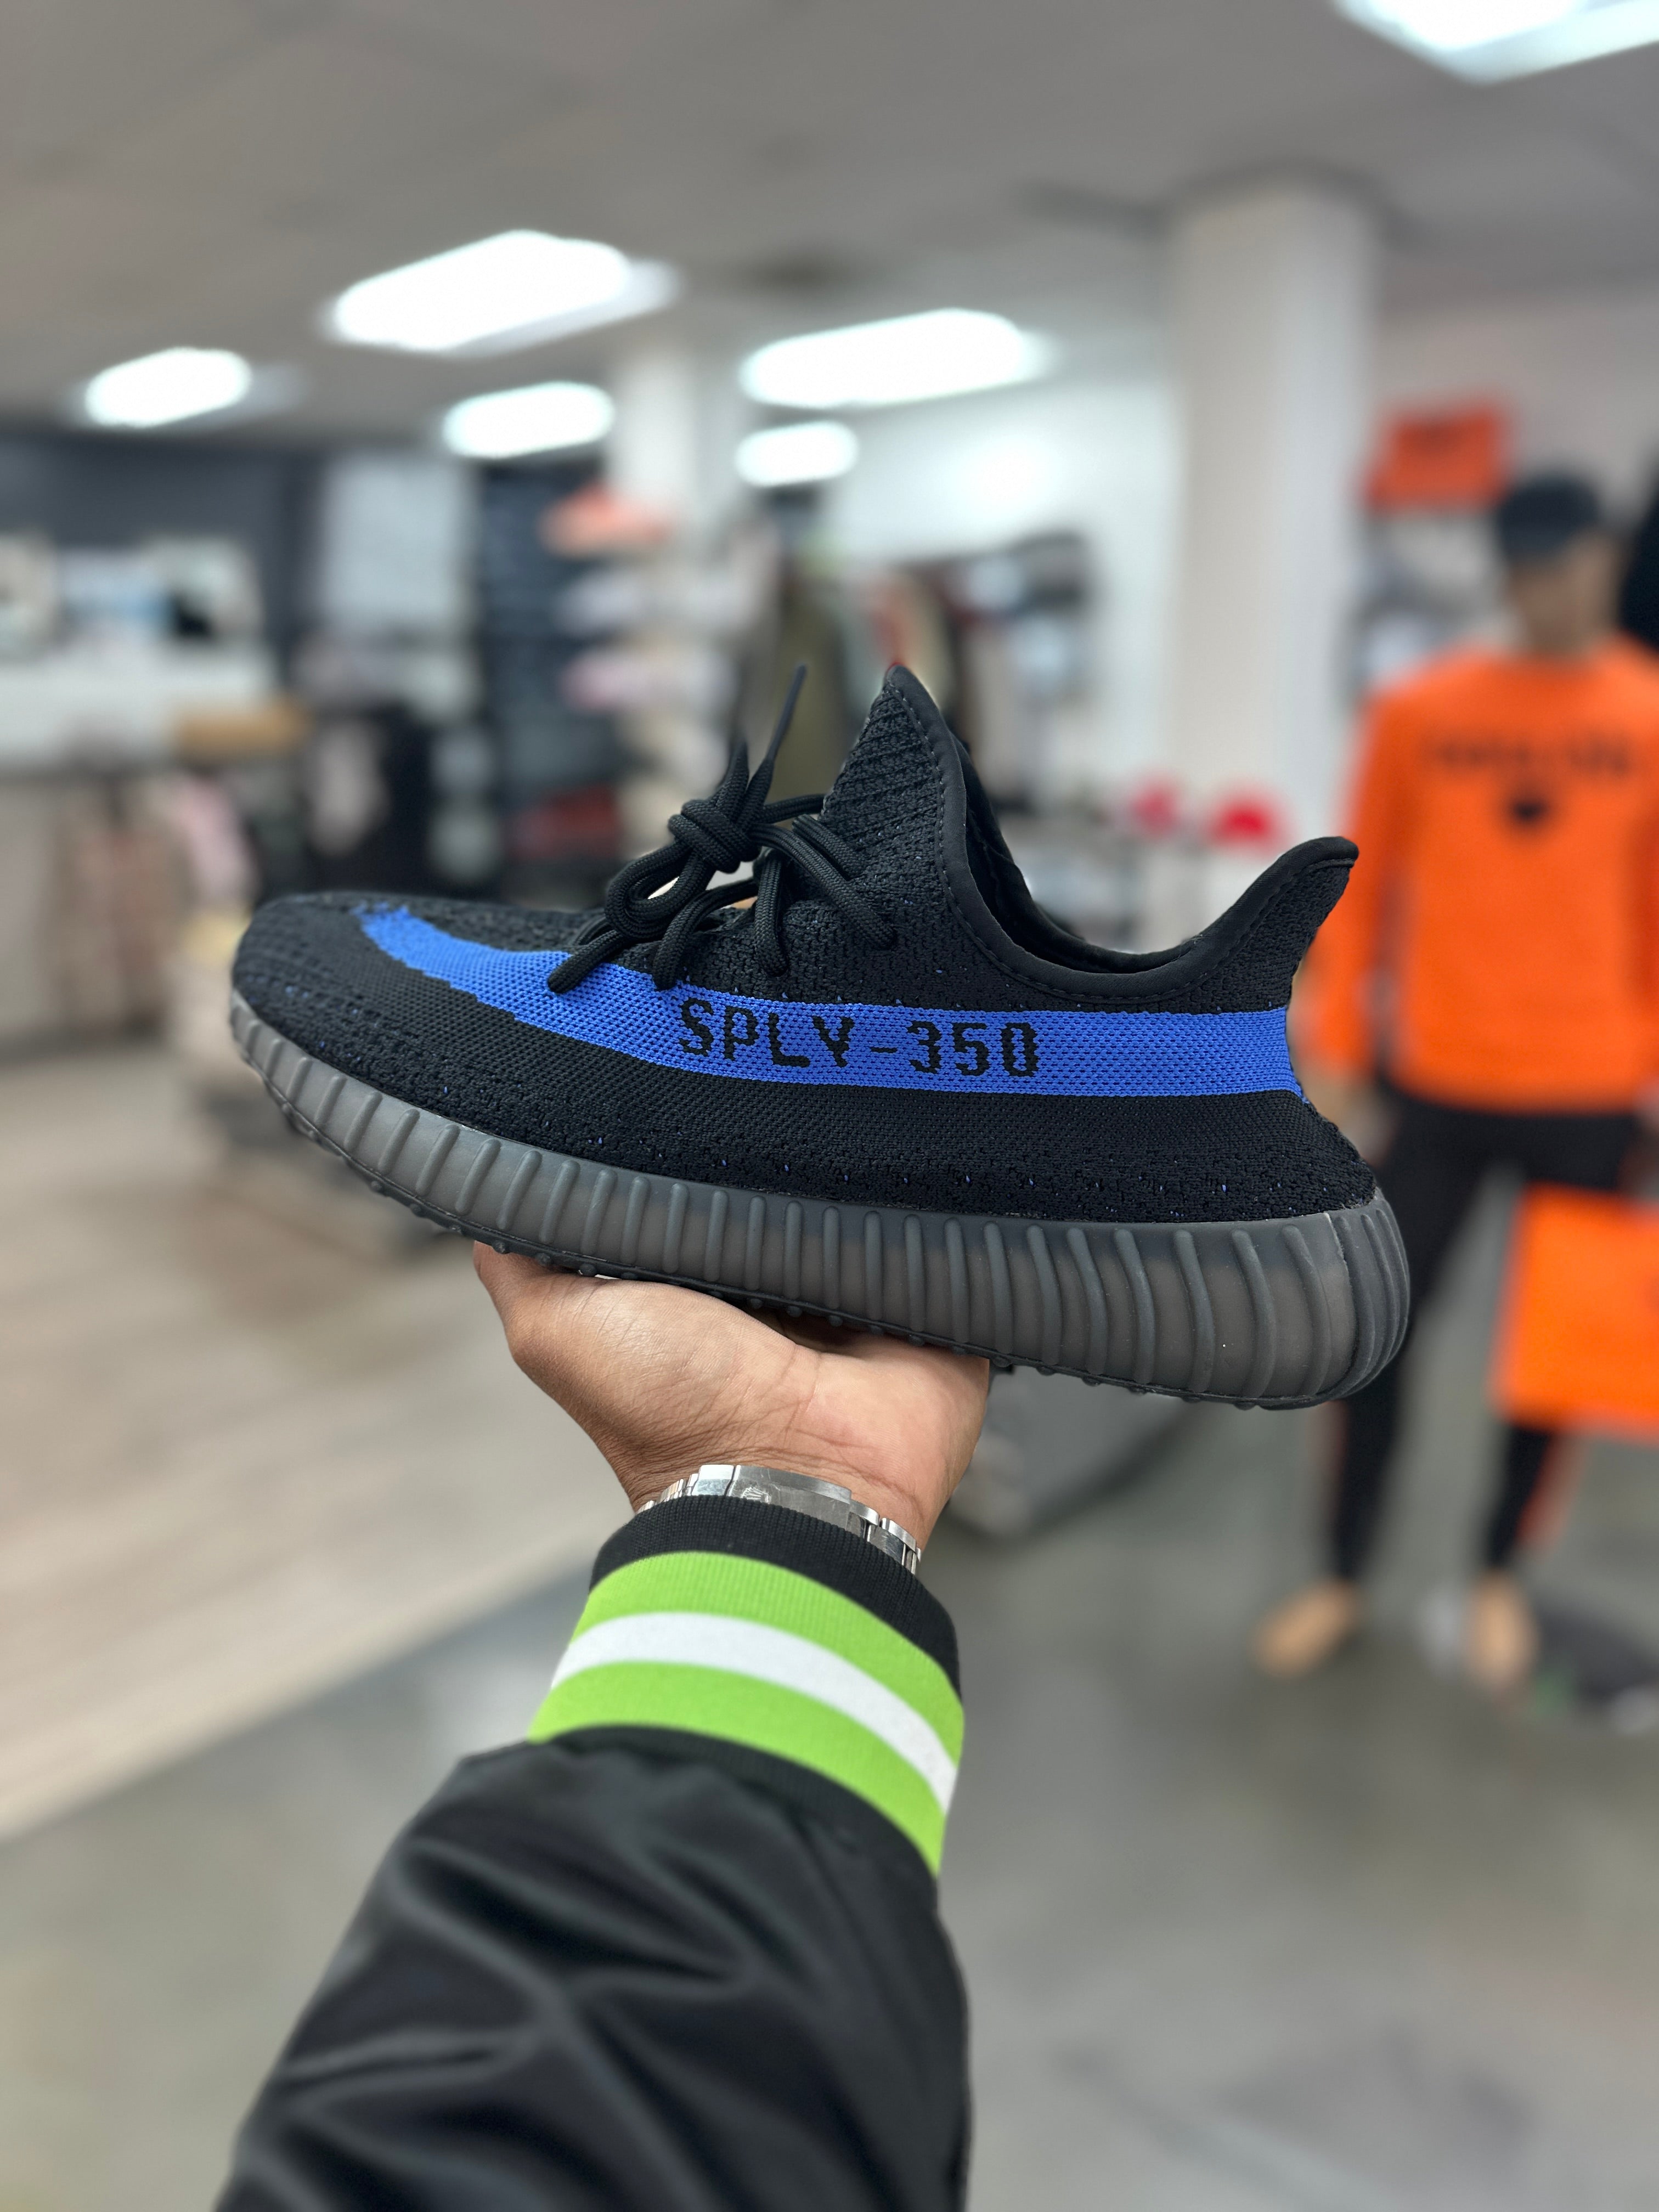 Adidas 350 V2 Blue - Luxuries Luck